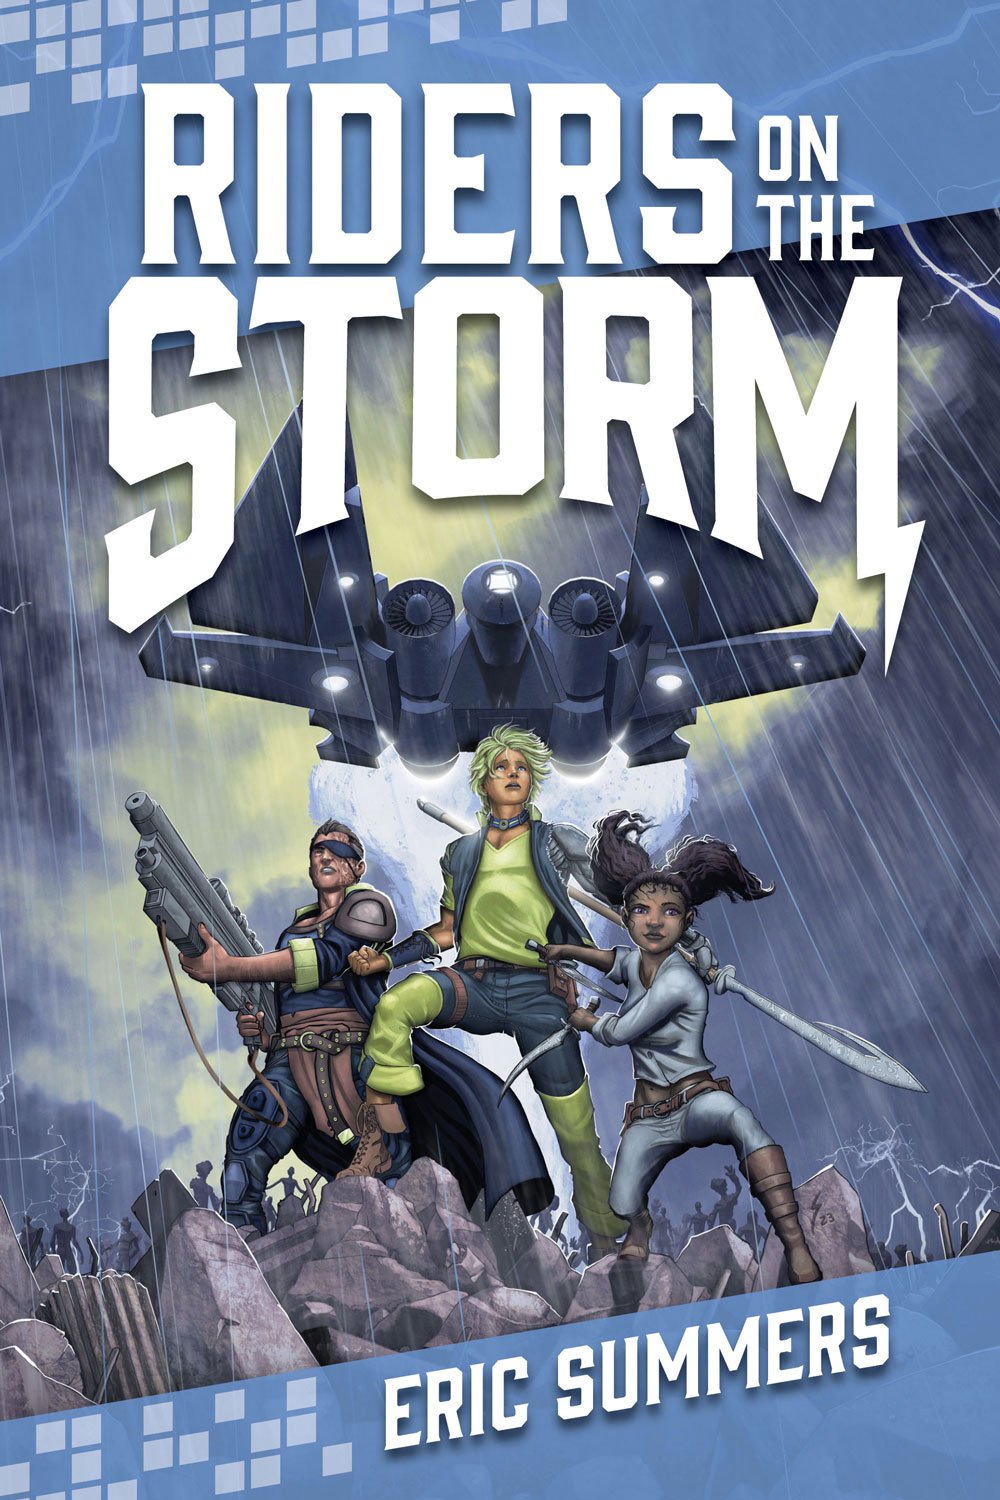 Cover of Eric Summers' science fiction novel Riders on the Storm